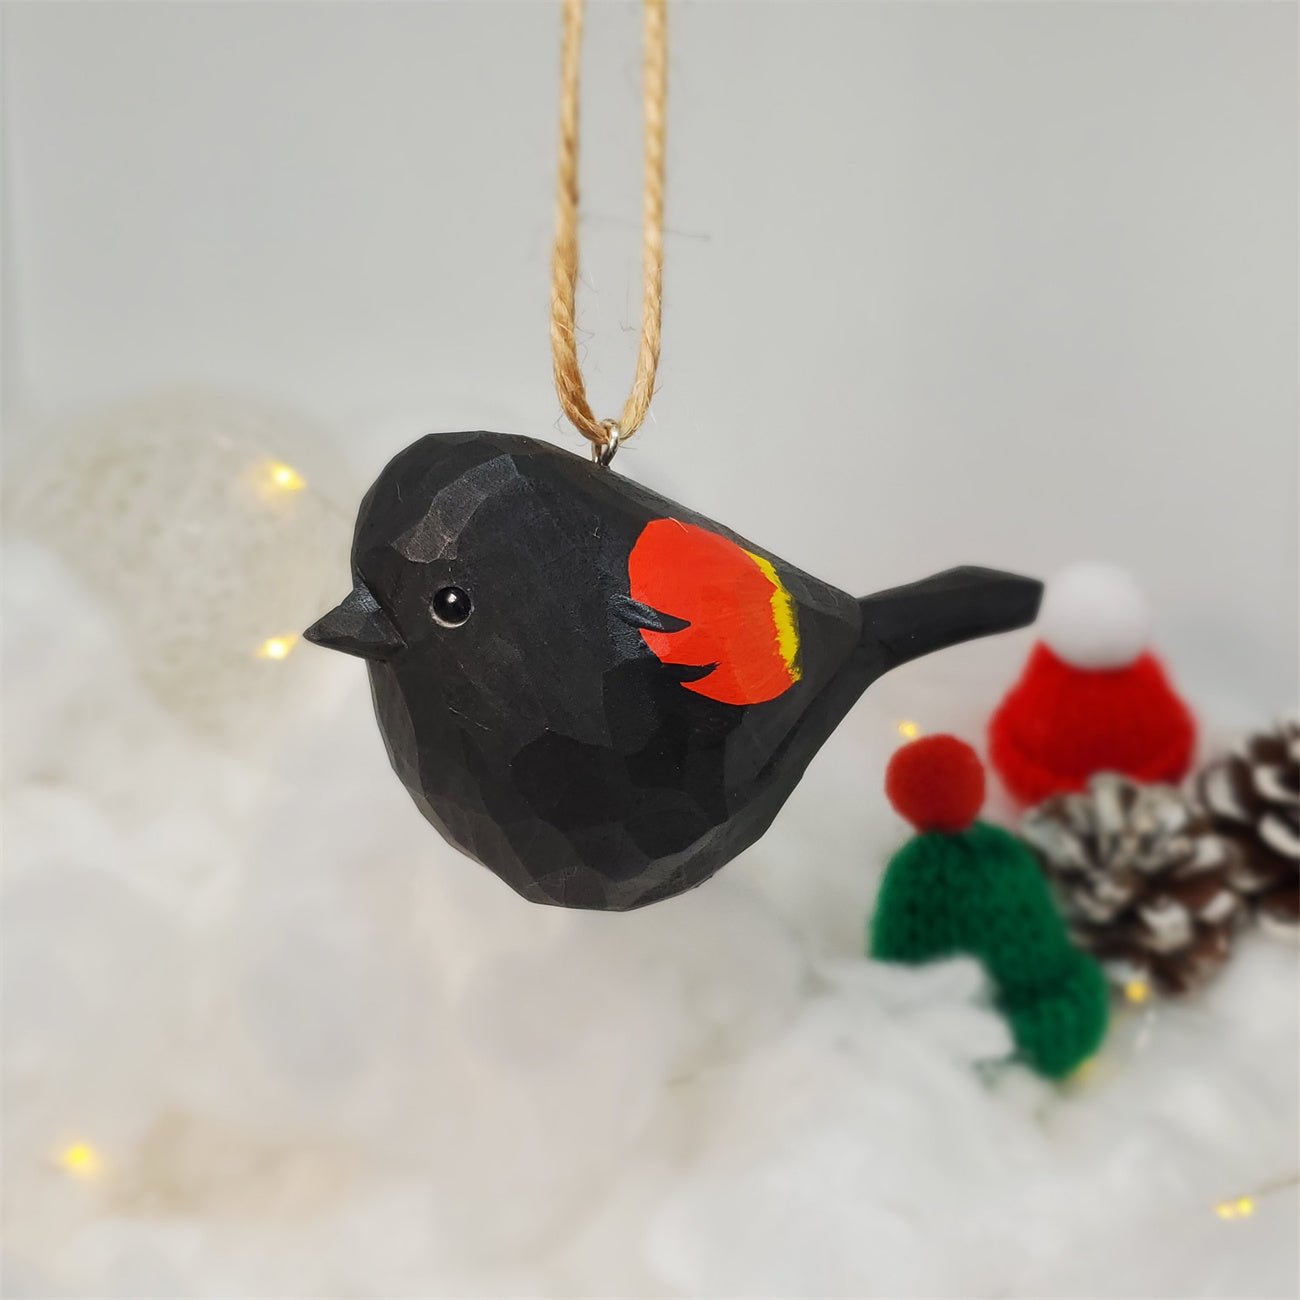 Blackbird Carved and Painted Wooden Bird Ornaments - PAINTED BIRD SHOP